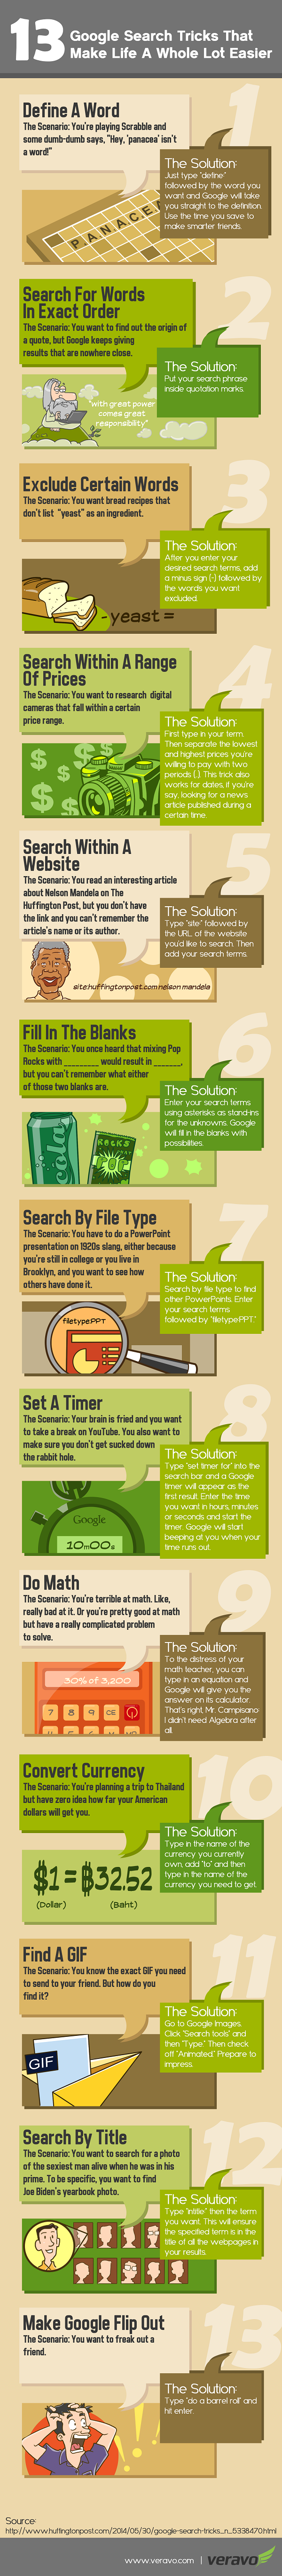 google search trick infographic